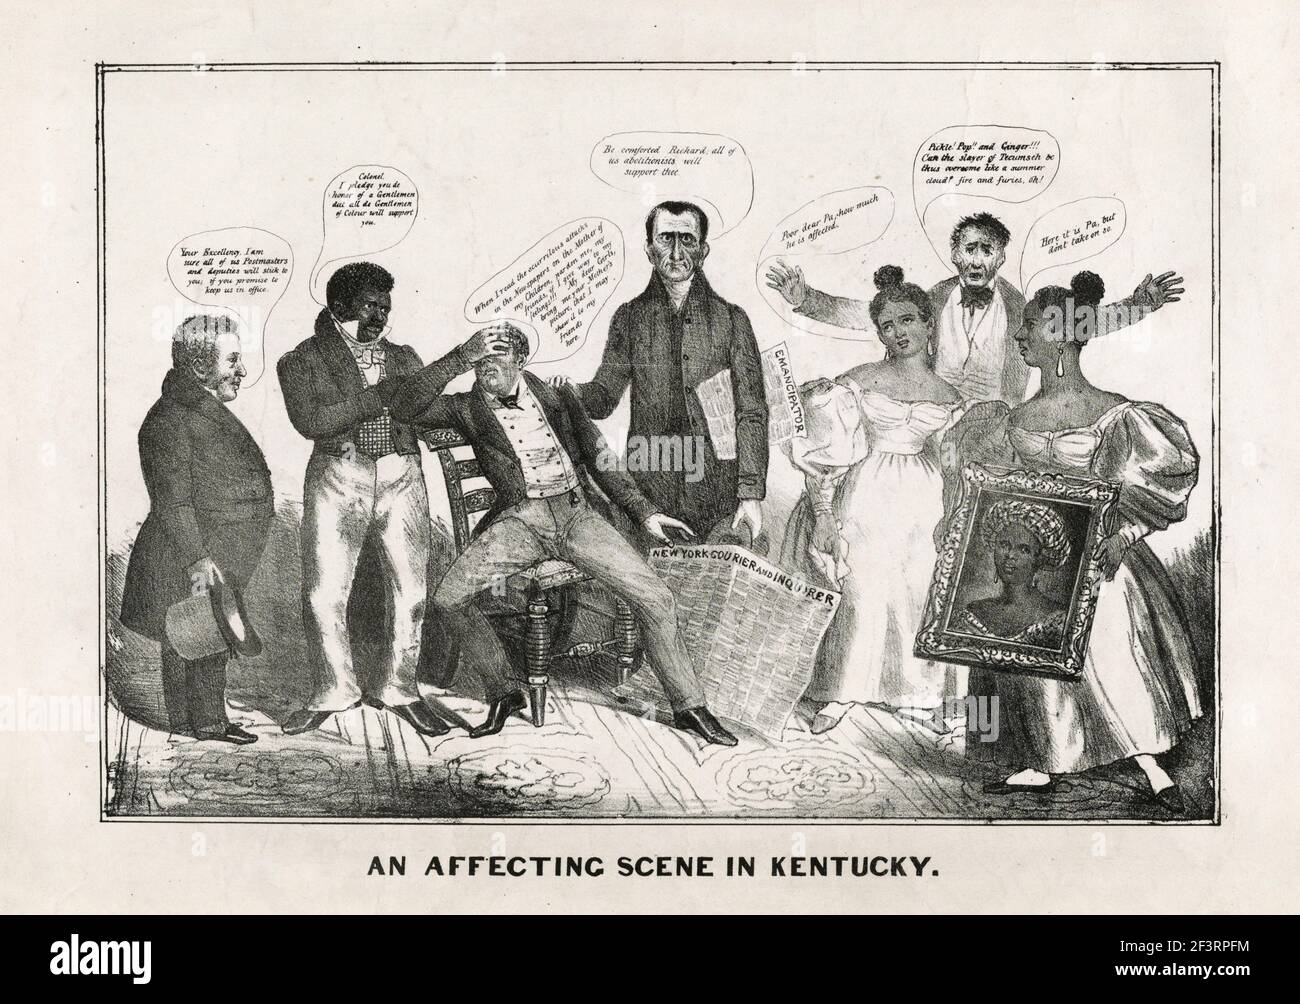 An affecting scene in Kentucky - A racist attack on Democratic vice-presidential candidate Richard M. Johnson. The Kentucky Congressman's nomination, in May 1835, as Van Buren's running-mate for the 1836 election raised eyebrows even among party faithful, because of Johnson's common-law marriage to a mulatto woman, Julia Chinn, by whom he fathered two daughters. The artist ridicules Johnson's domestic situation, and the Democrats' constituency as well. Seated in a chair with his hand over his face, a visibly distraught Johnson lets a copy of James Watson Webb's 'New York Courier and Enquirer' Stock Photo